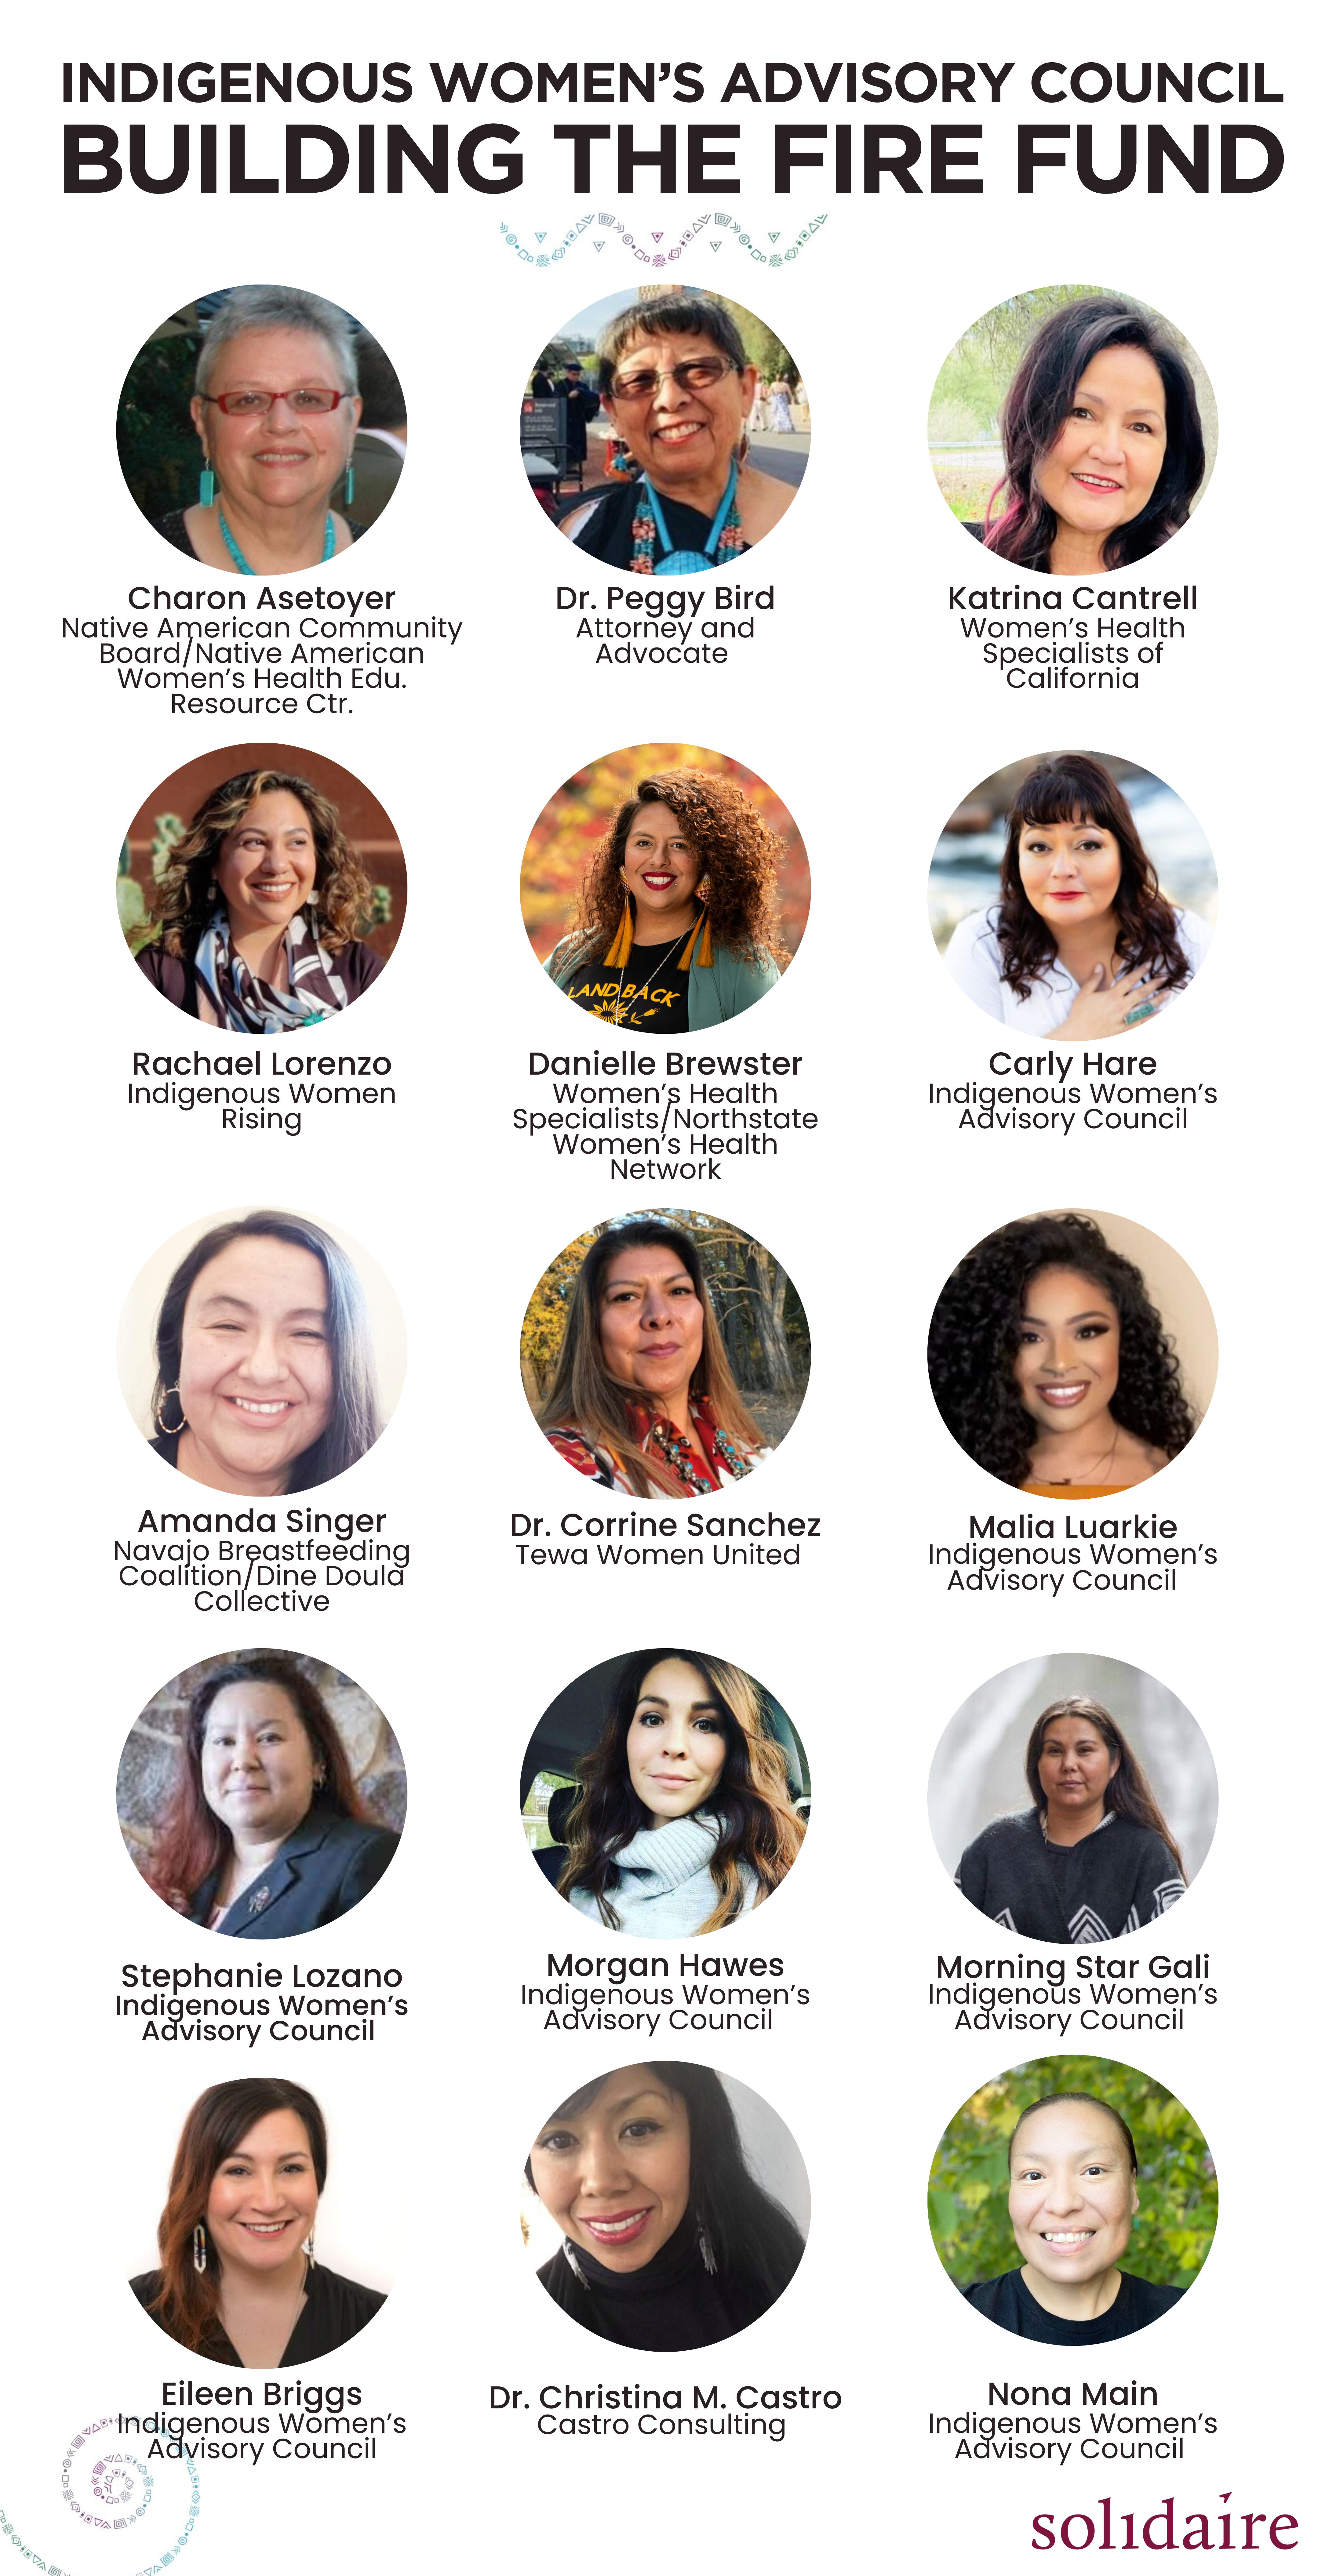 Indigenous Women’s Advisory Council and the images and names of 15 Indigenous leaders